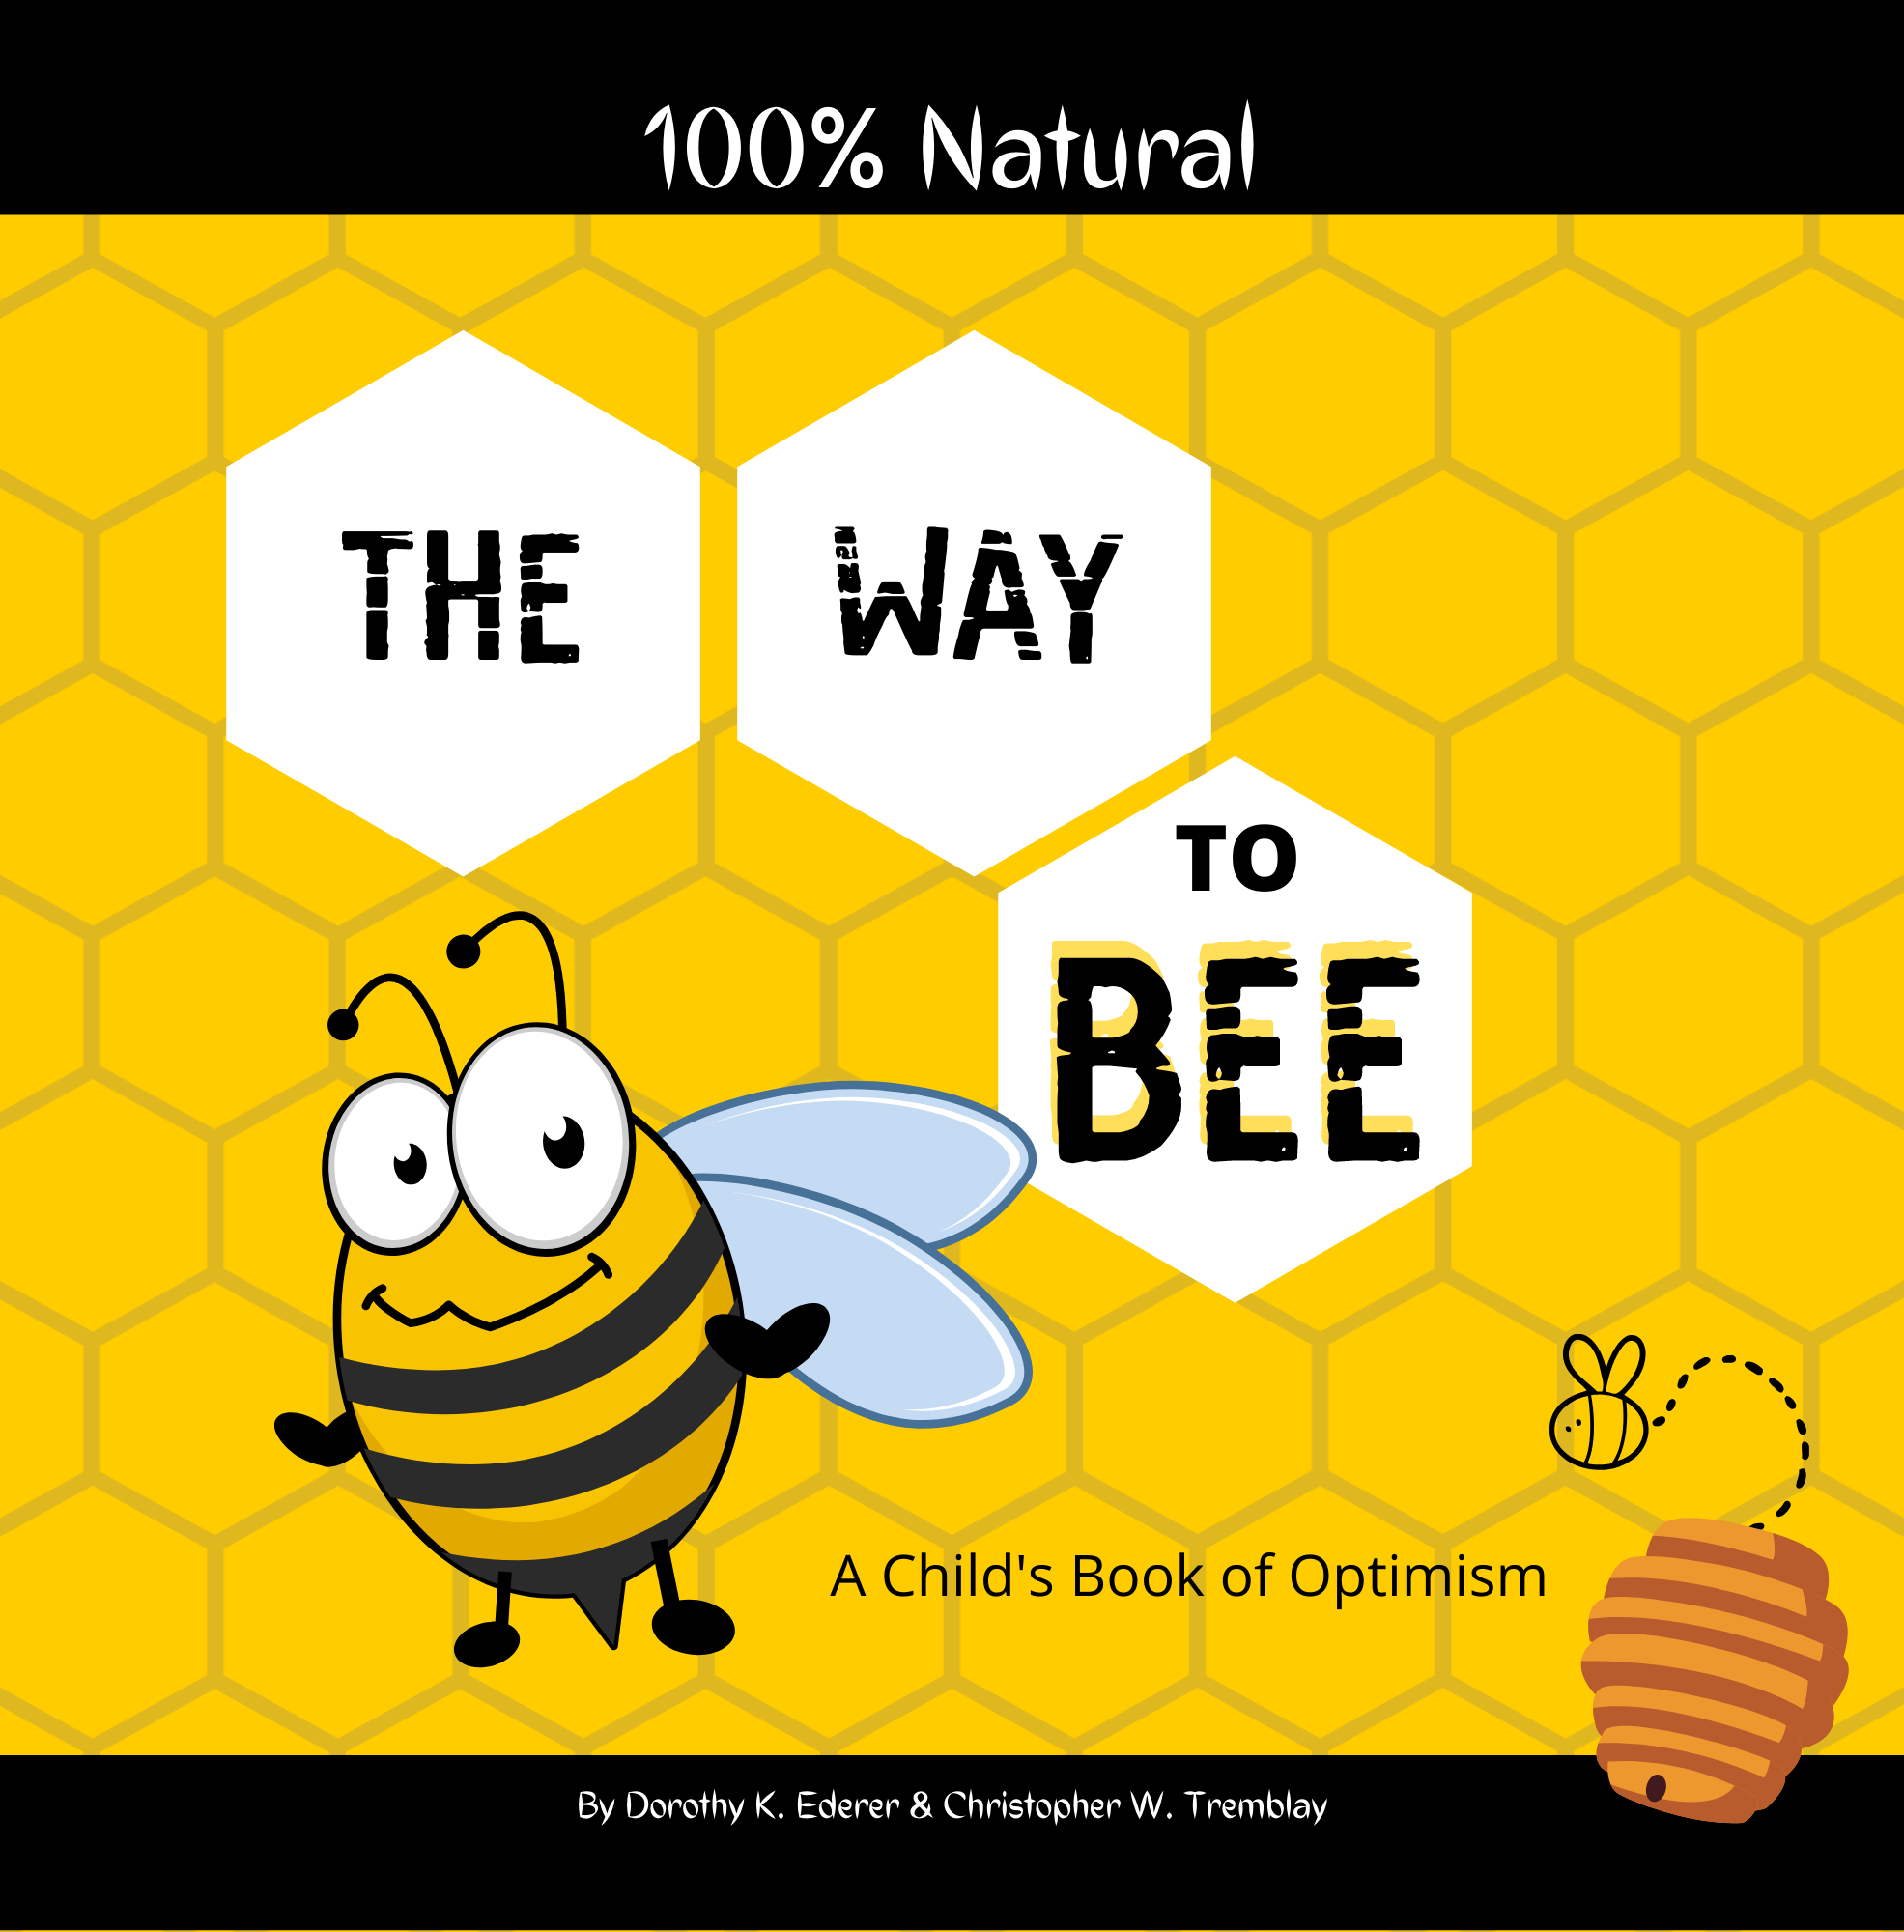 Bees (5).png